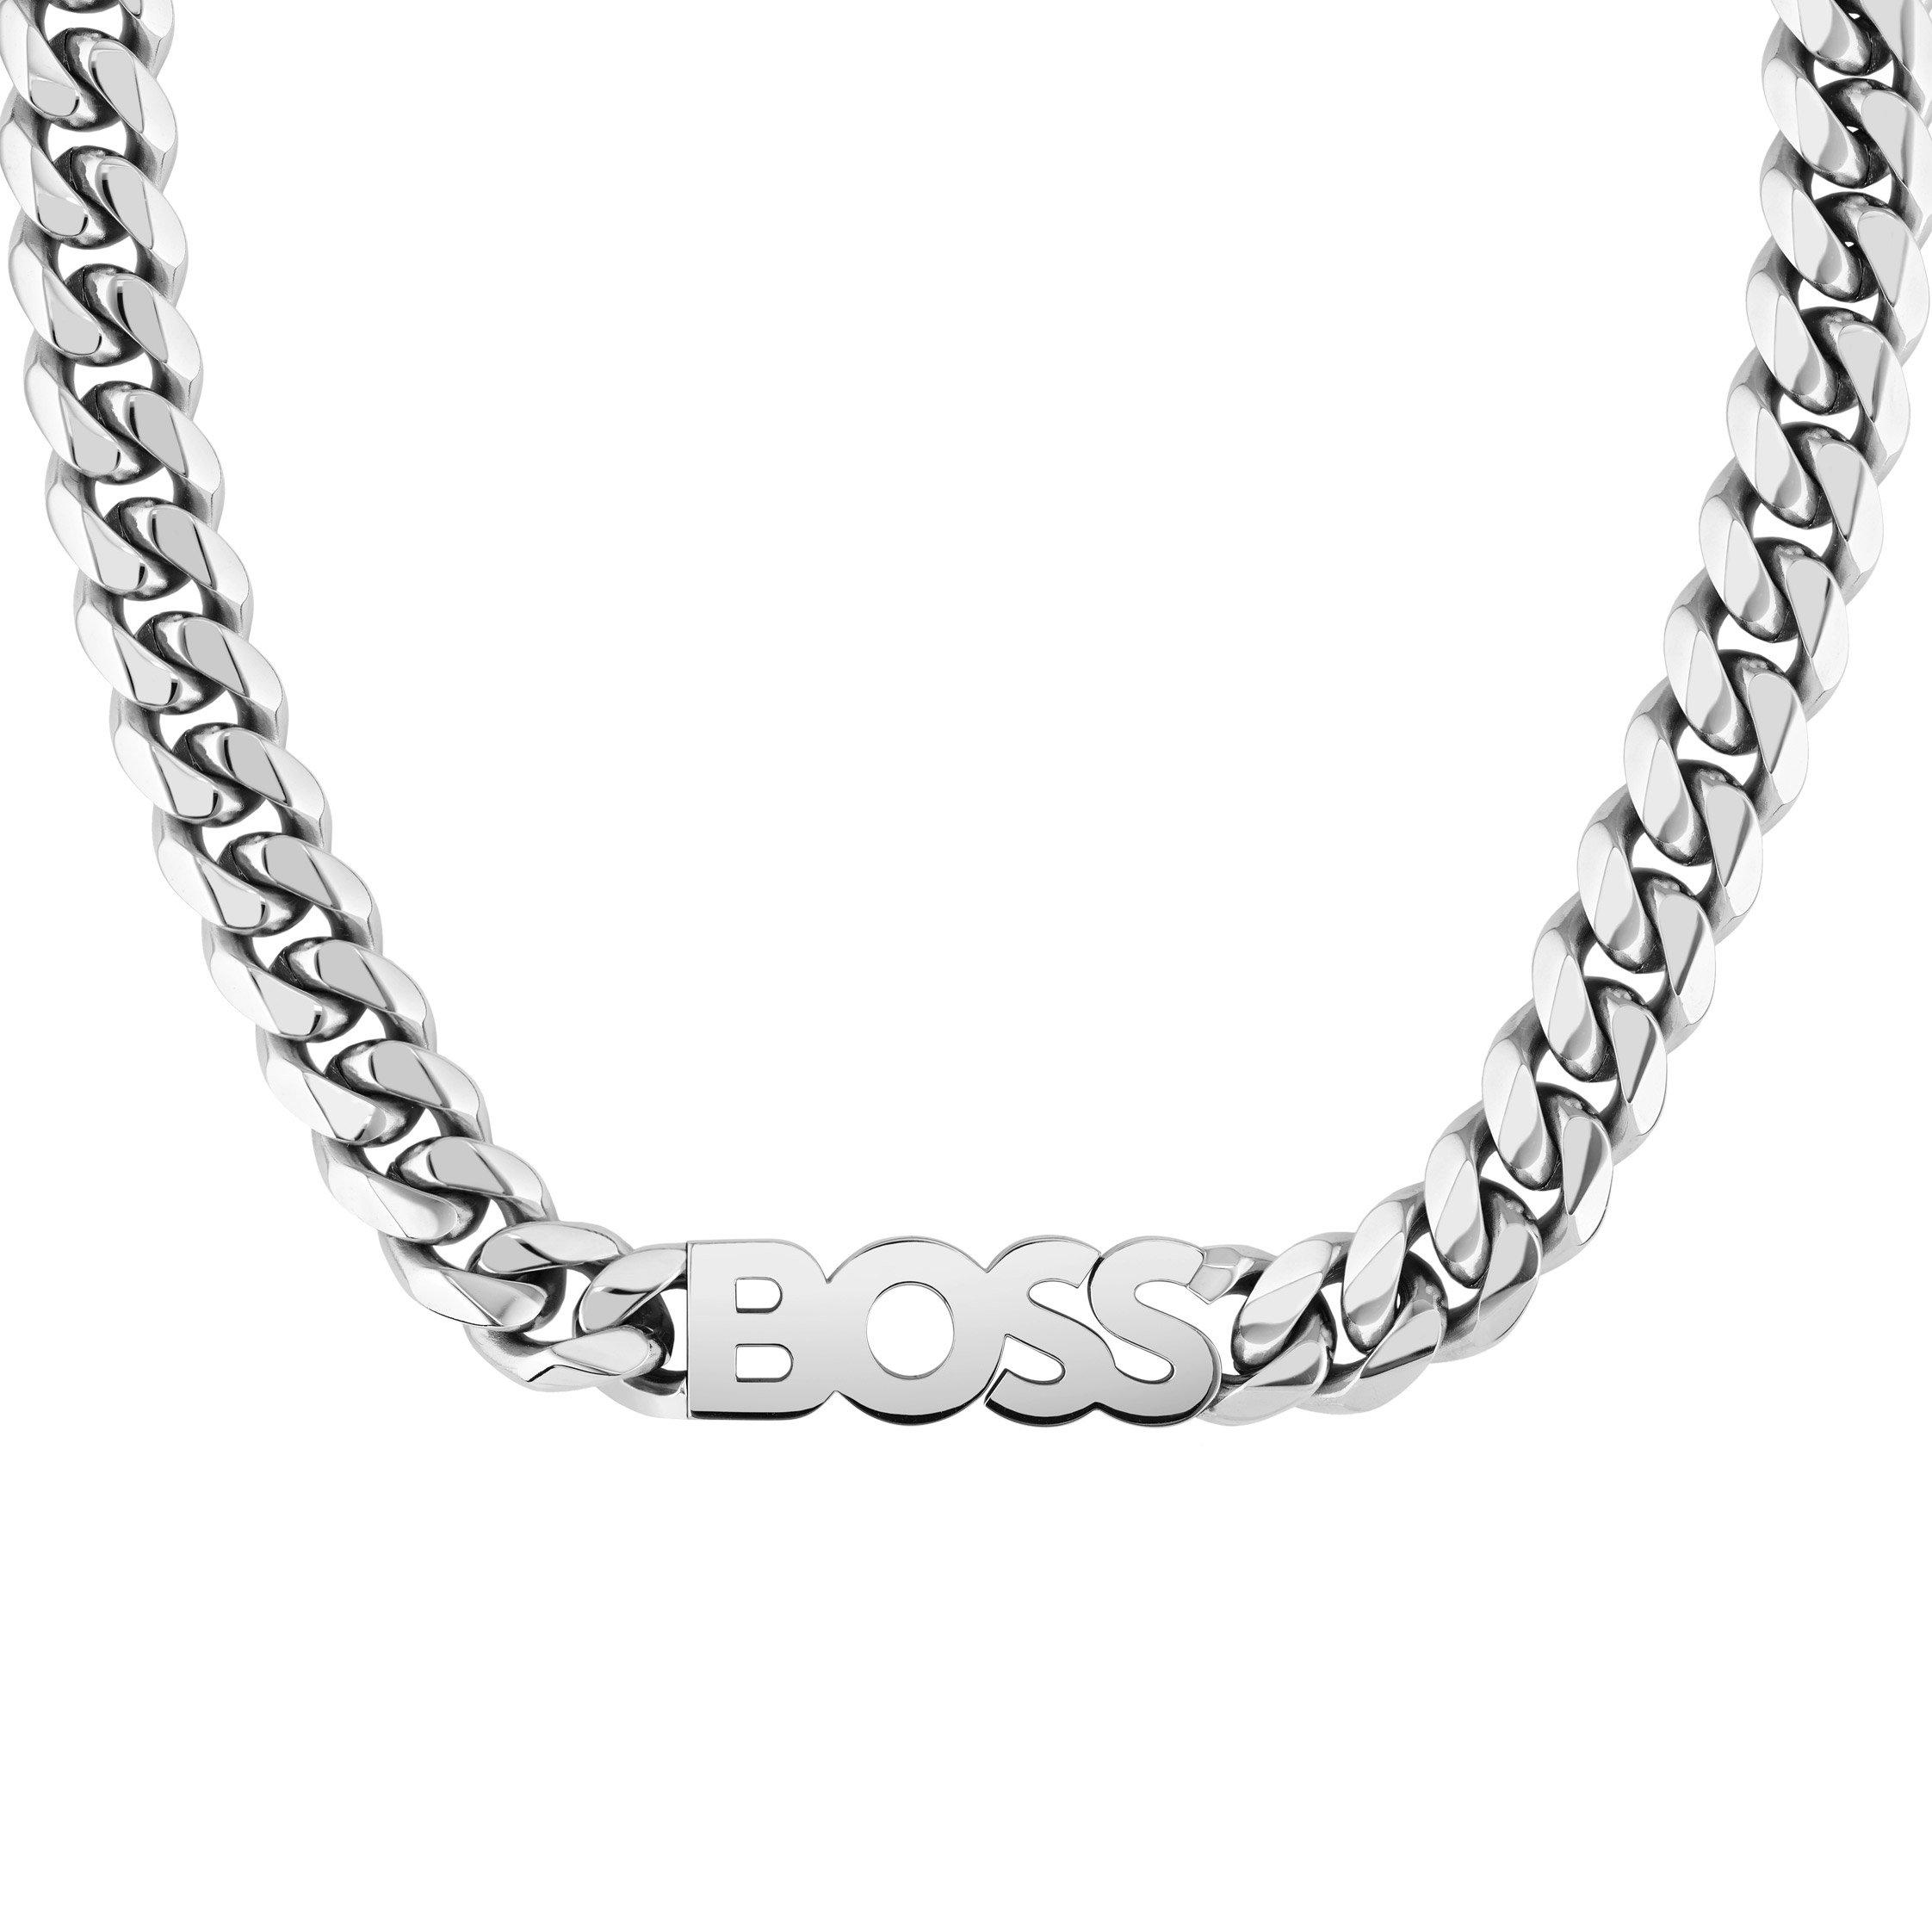 BOSS Chain Men’s Necklace | 0134931 | Beaverbrooks the Jewellers